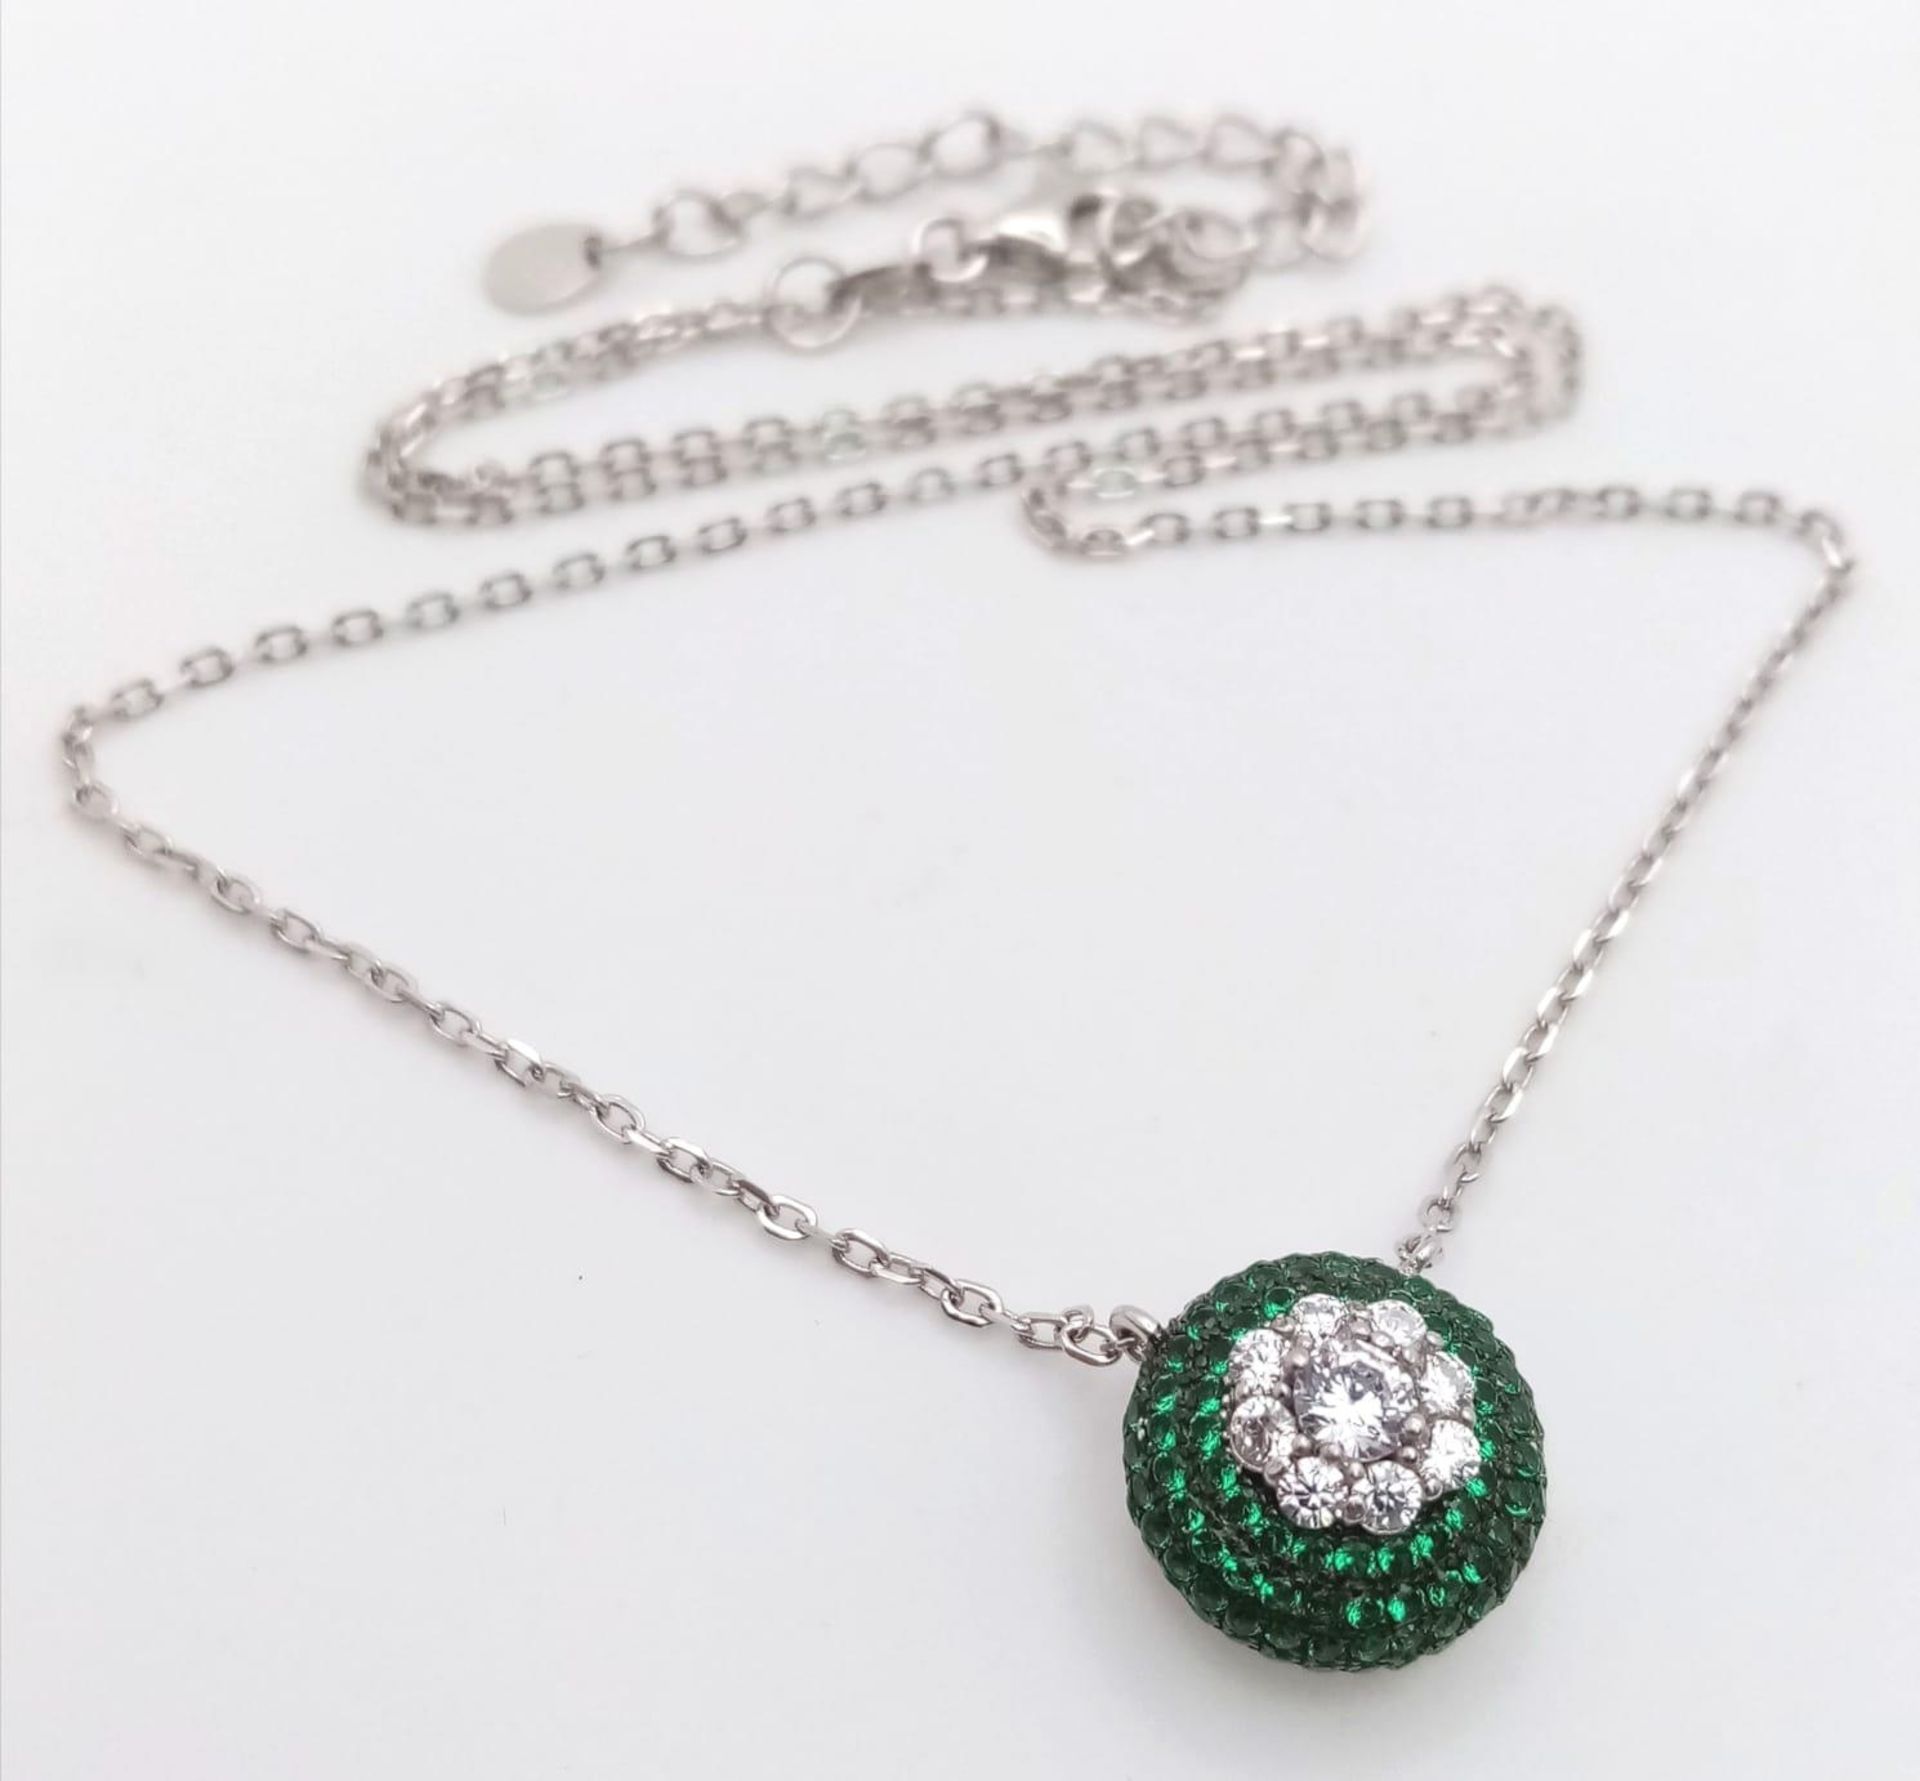 A 925 Silver, Green and White Stone Pendant on a 925 Silver Disappearing Necklace.